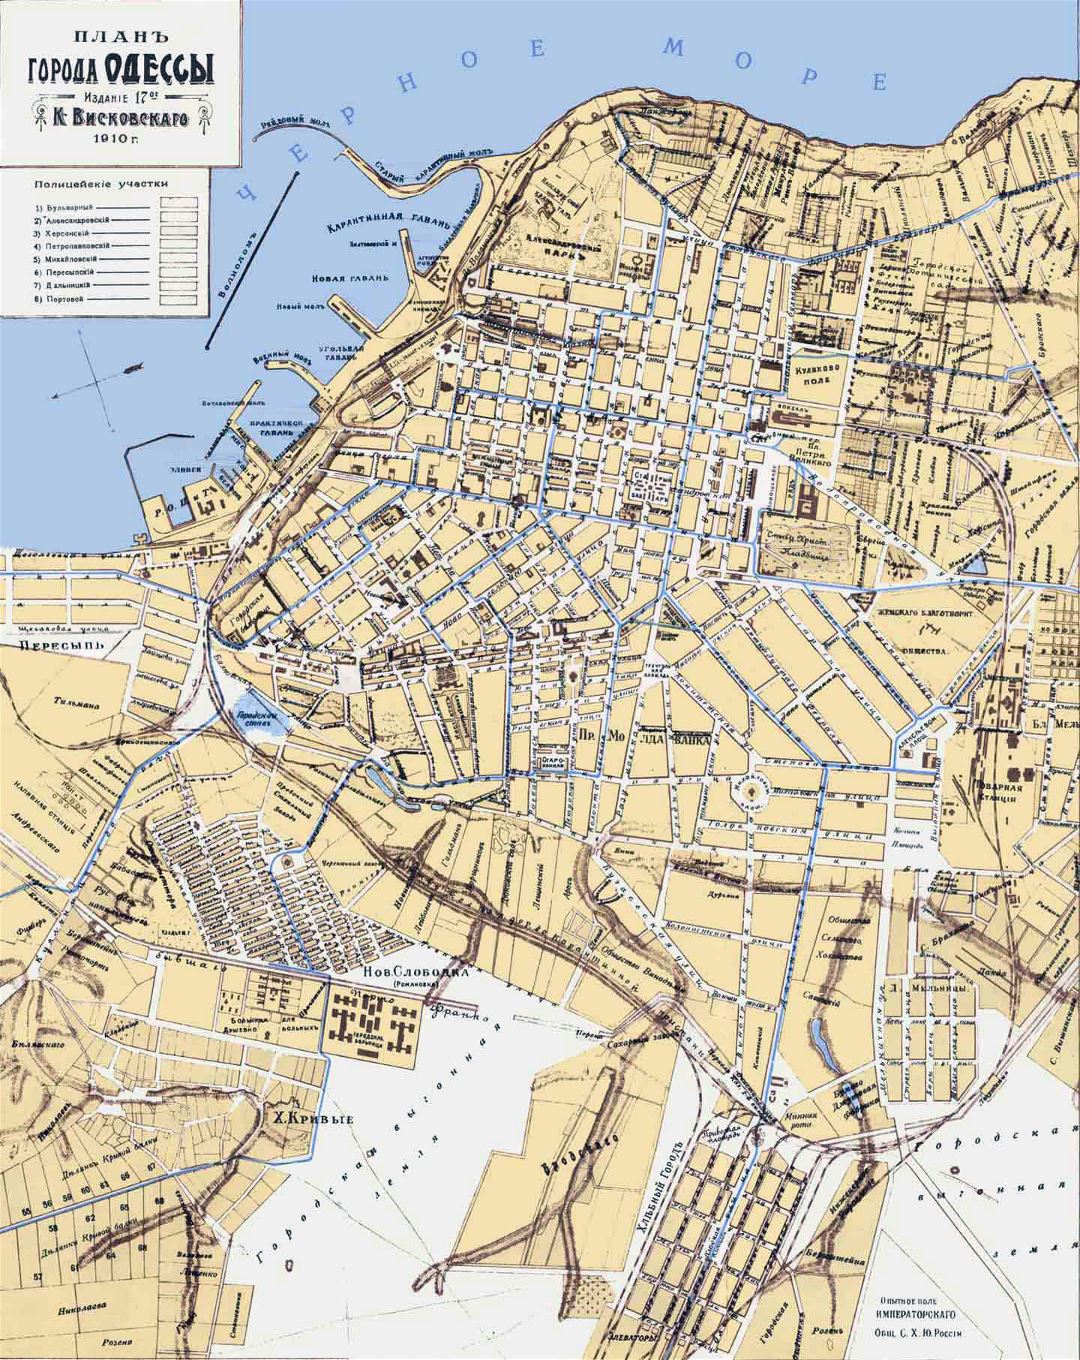 Detailed old map of Odessa city - 1910